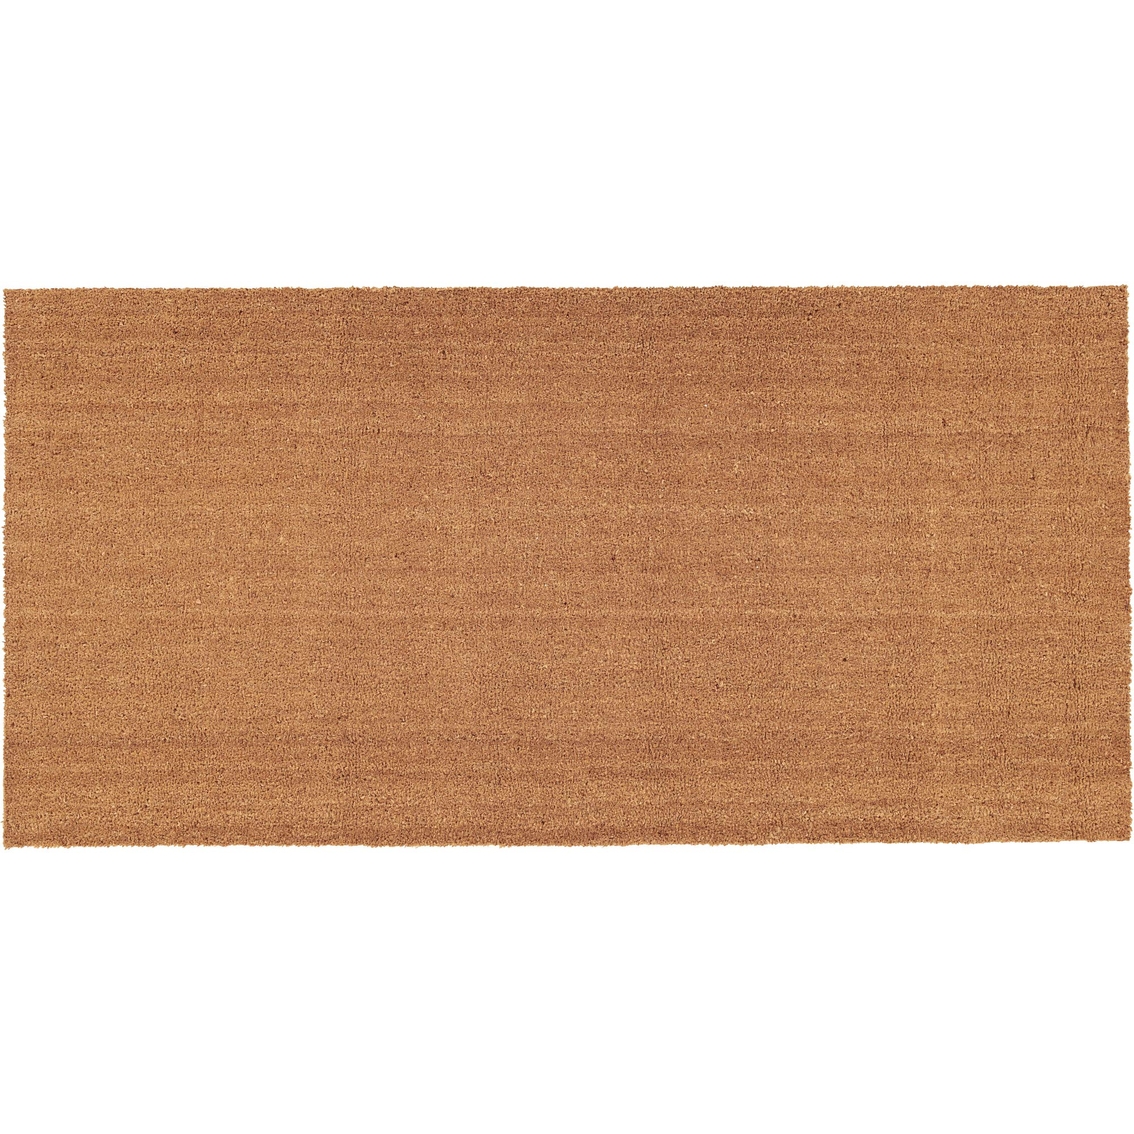 Calloway Mills Natural Coir with Vinyl Backing Doormat 24 x 36 in. - Image 2 of 2